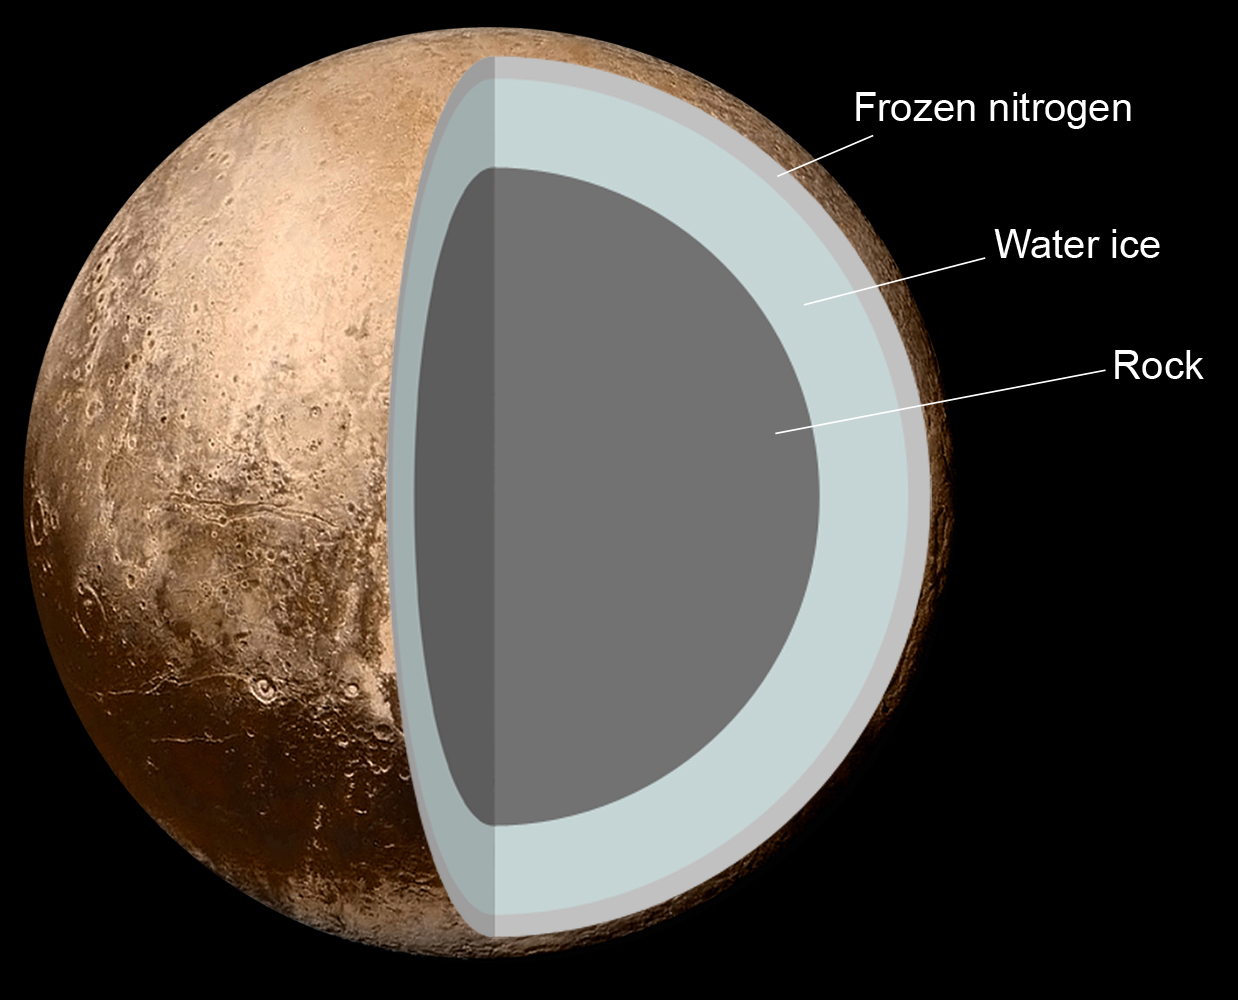 Figure 9: Pluto’s density is 1.860g/cm3. This would imply a mixture of rock and ices. The rocky core contains radioactive isotopes which decay over time, producing a weak internal heat source. There is some speculation that faulting of Pluto’s surface, which is indicative of past expansion of the dwarf planet, may be evidence for a residual subsurface liquid water layer some 100 to 180 km thick at the core–mantle boundary, like the sub-surface oceans postulated for Europa, Ganymede or Titan. Credit: NASA/JHUAPL/SwRI